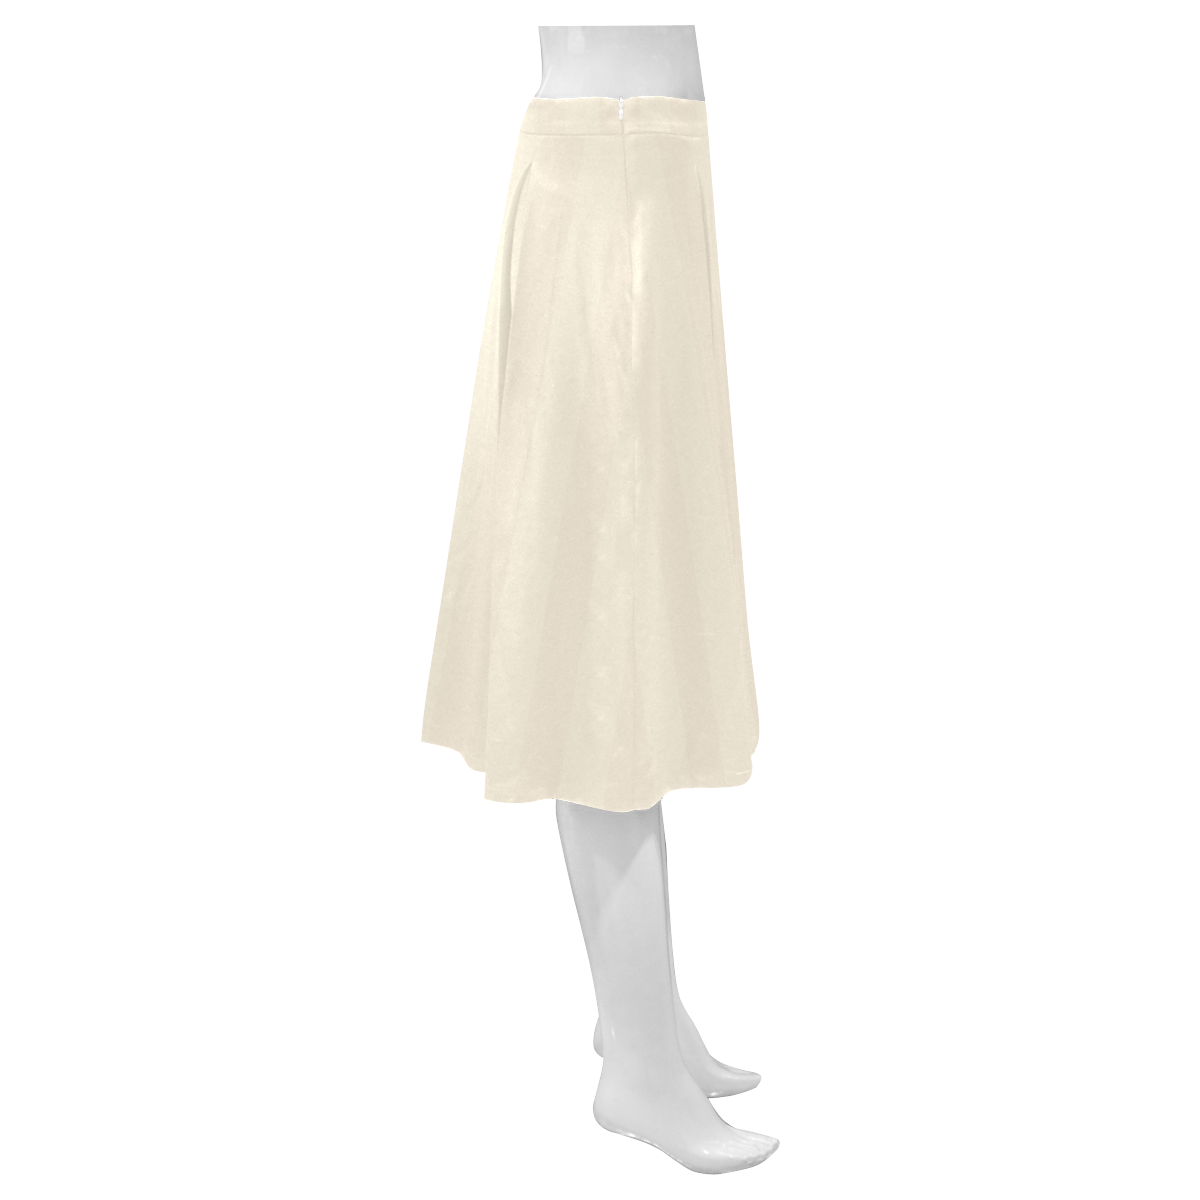 Stripes in Pastel Tan and Beige Mnemosyne Women's Crepe Skirt (Model D16)